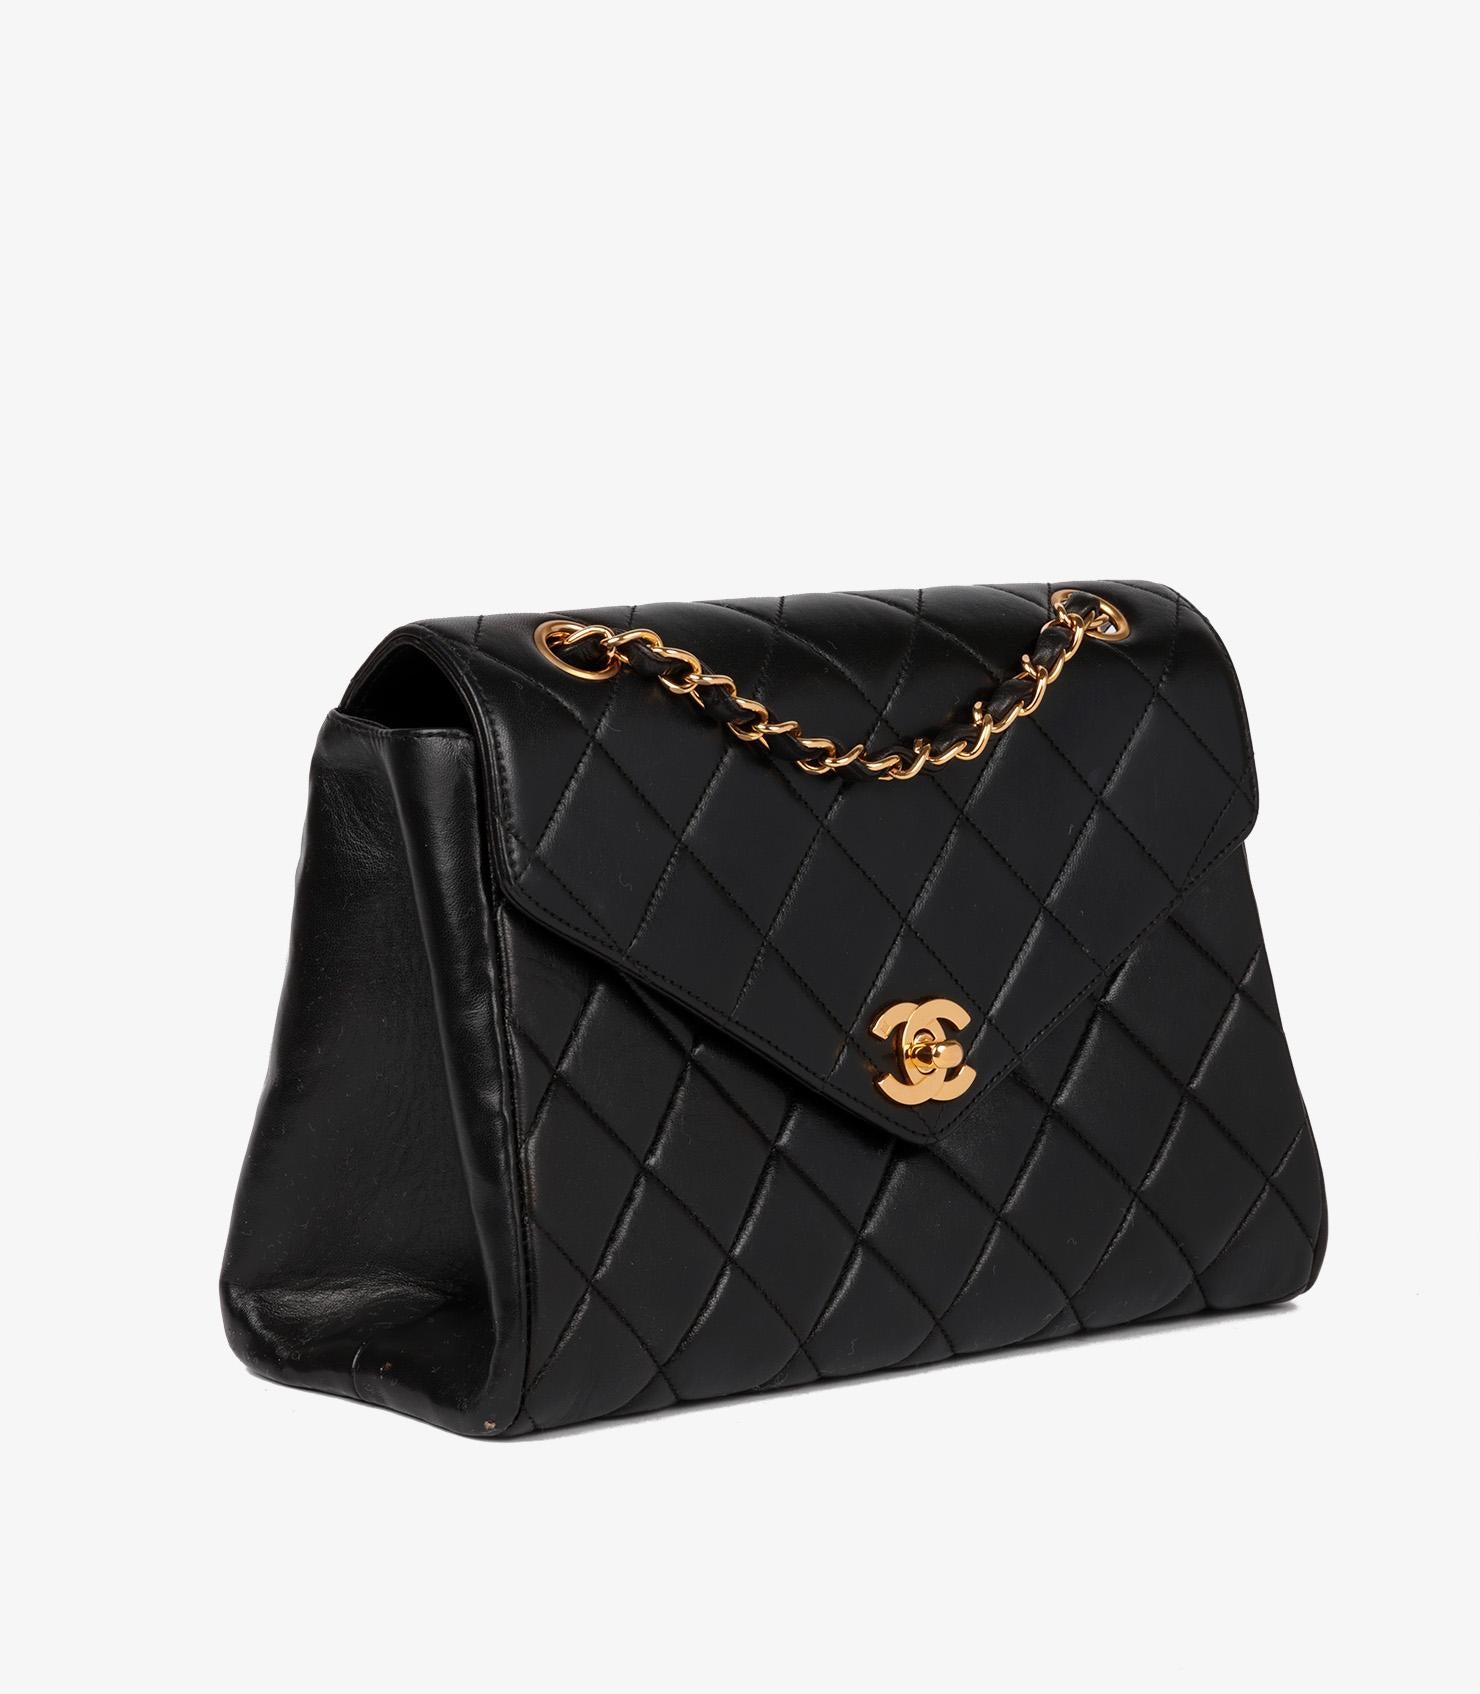 Chanel Black Quilted Lambskin Vintage Medium Envelope Classic Single Flap Bag

Brand- Chanel
Model- Medium Envelope Classic Single Flap Bag
Product Type- Crossbody, Shoulder
Serial Number- 37*****
Age- Circa 1994
Accompanied By- Chanel Dust Bag,